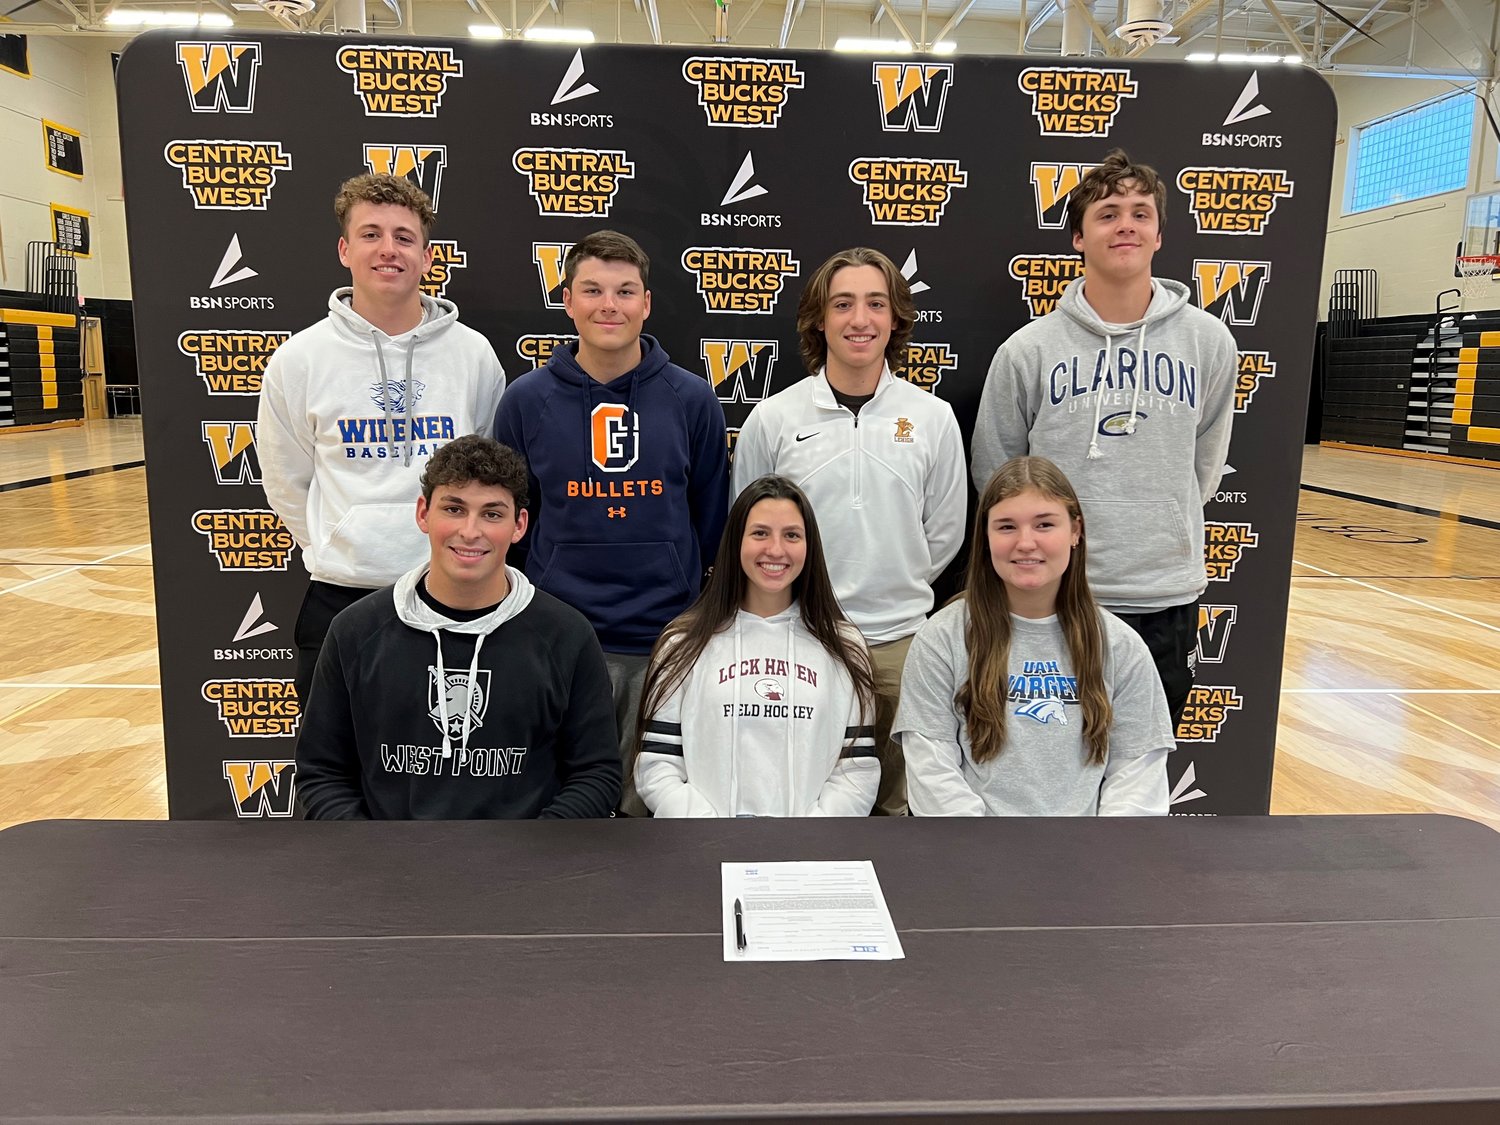 Central Bucks West honored seven seniors at a college commitment ceremony on Nov. 9. From left are: front row, Max McGlone, Kendall Siegle and Margot Haring; back row, Kevin Bukowski, Matt Carr, Julio Ermigiotti and Luke Birkhead.